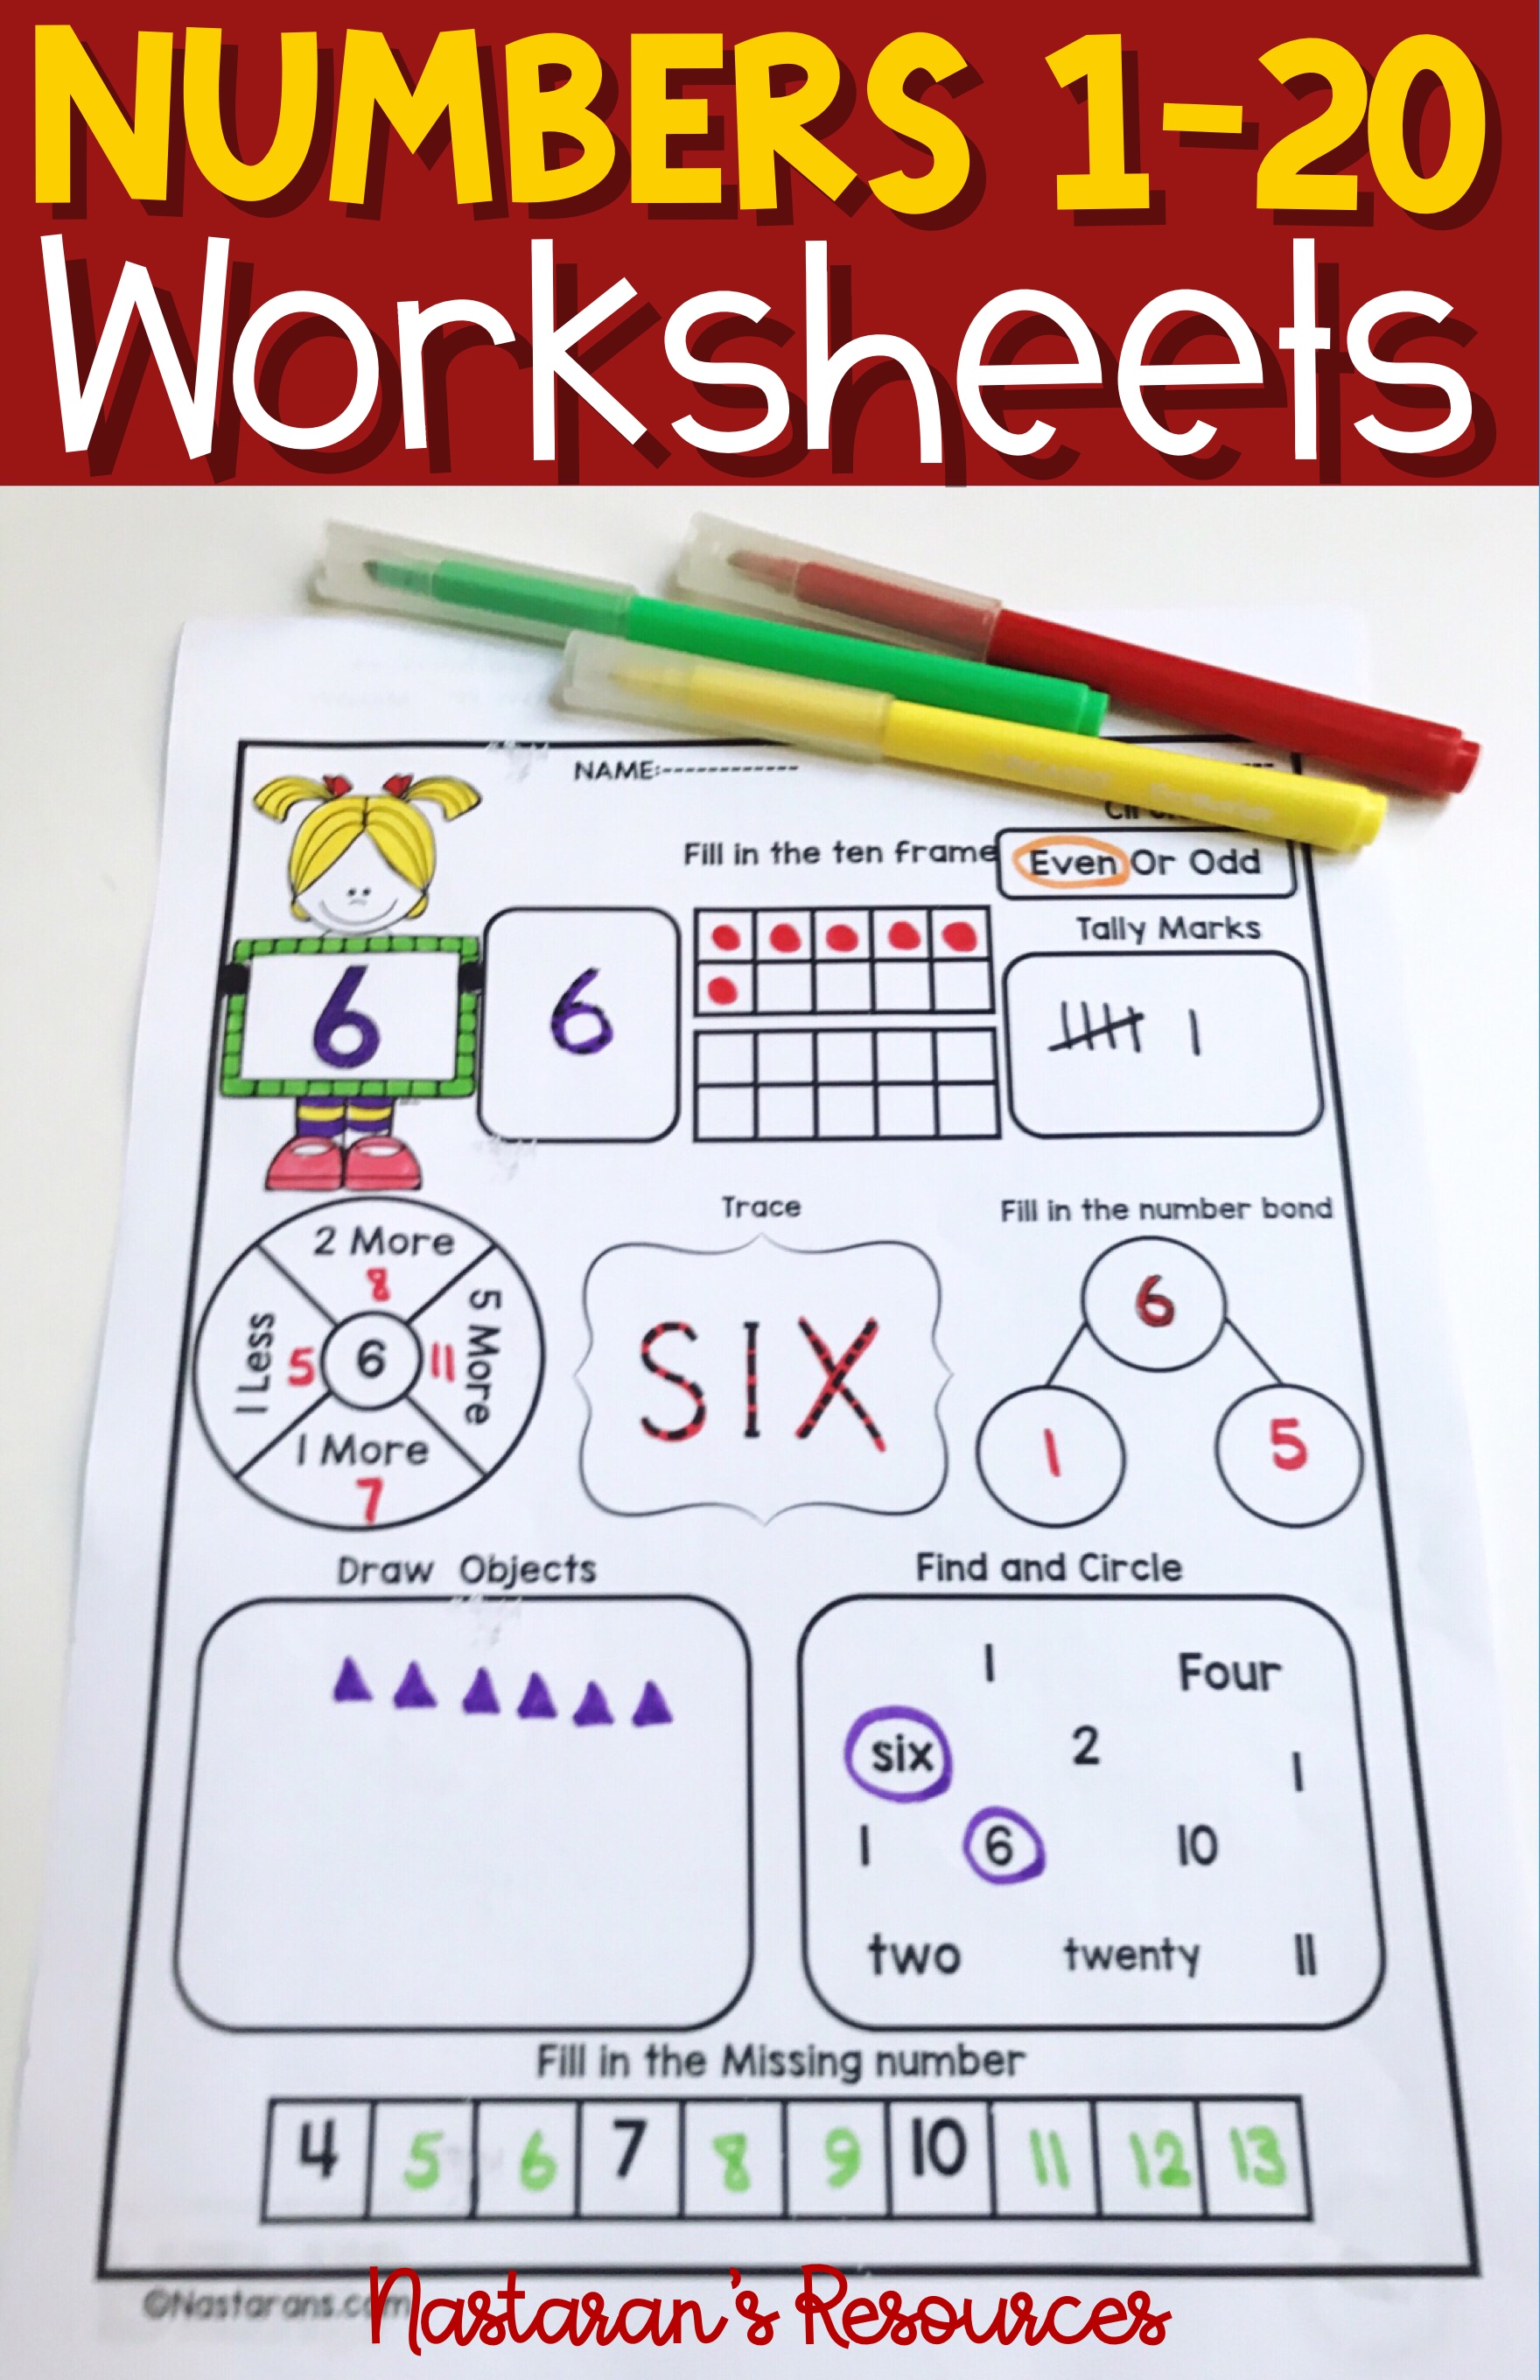 Are your students moving to learn 1 to 20 numbers? Click through to download a free worksheet to try numbers 1-20. Then, download all the printable practice pages. With these activities, your kids will learn all about the numbers 1-20! What's included?   It will help children to master numbers from 1 to 20 in many different ways. They will learn number words, finding, number sequencing, coloring, tallying, and filling the ten frame. Great for pre-k, kindergarten and first-grade students.